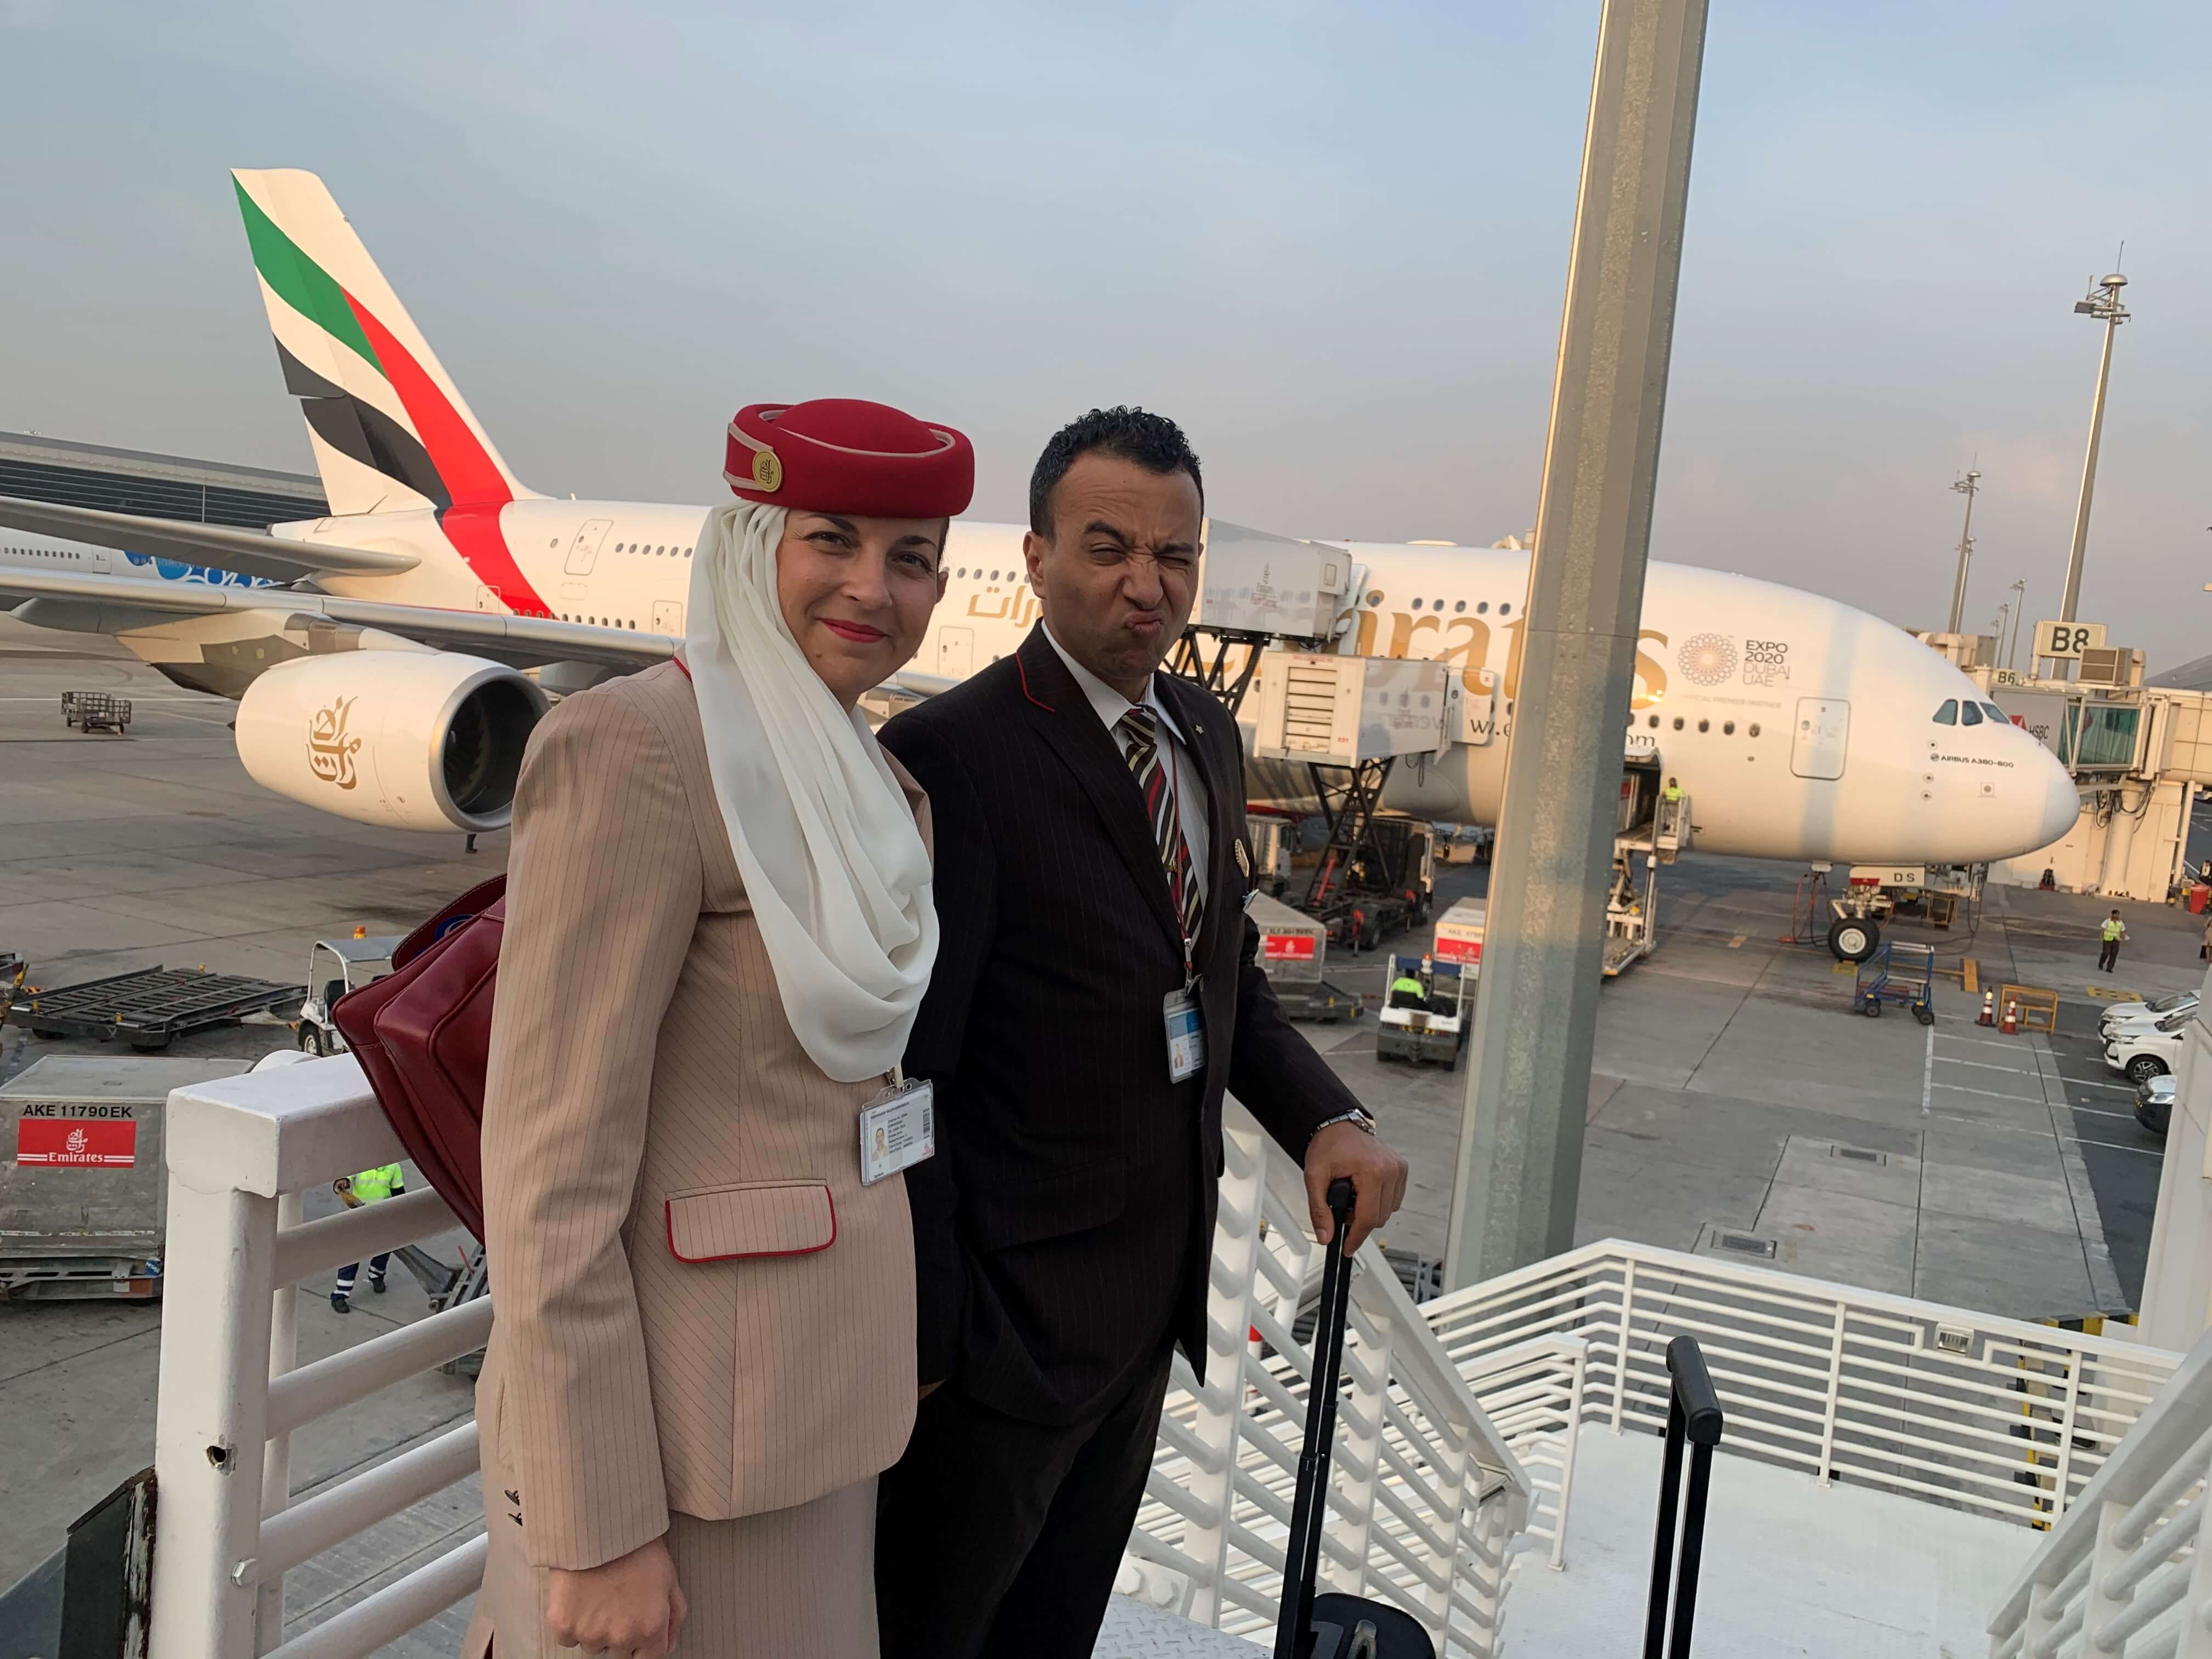 Couple’s journey: from Emirates cabin crew to honey business 